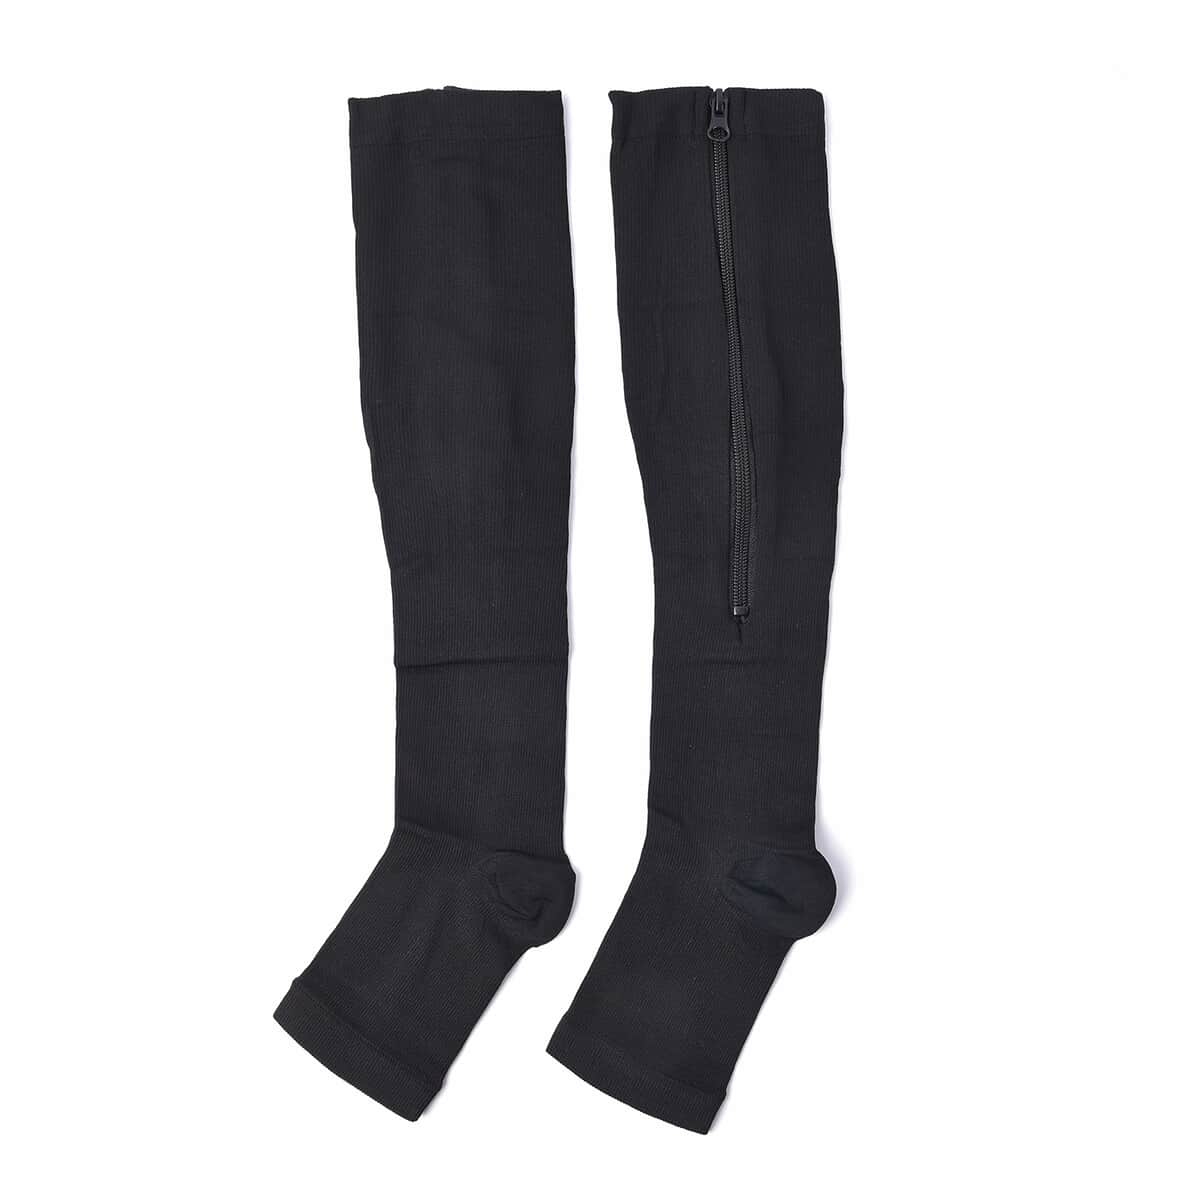 Set of 2 Pairs Black Zipper Compression Socks with Open Toe (S/M)-15-20mmHg image number 4